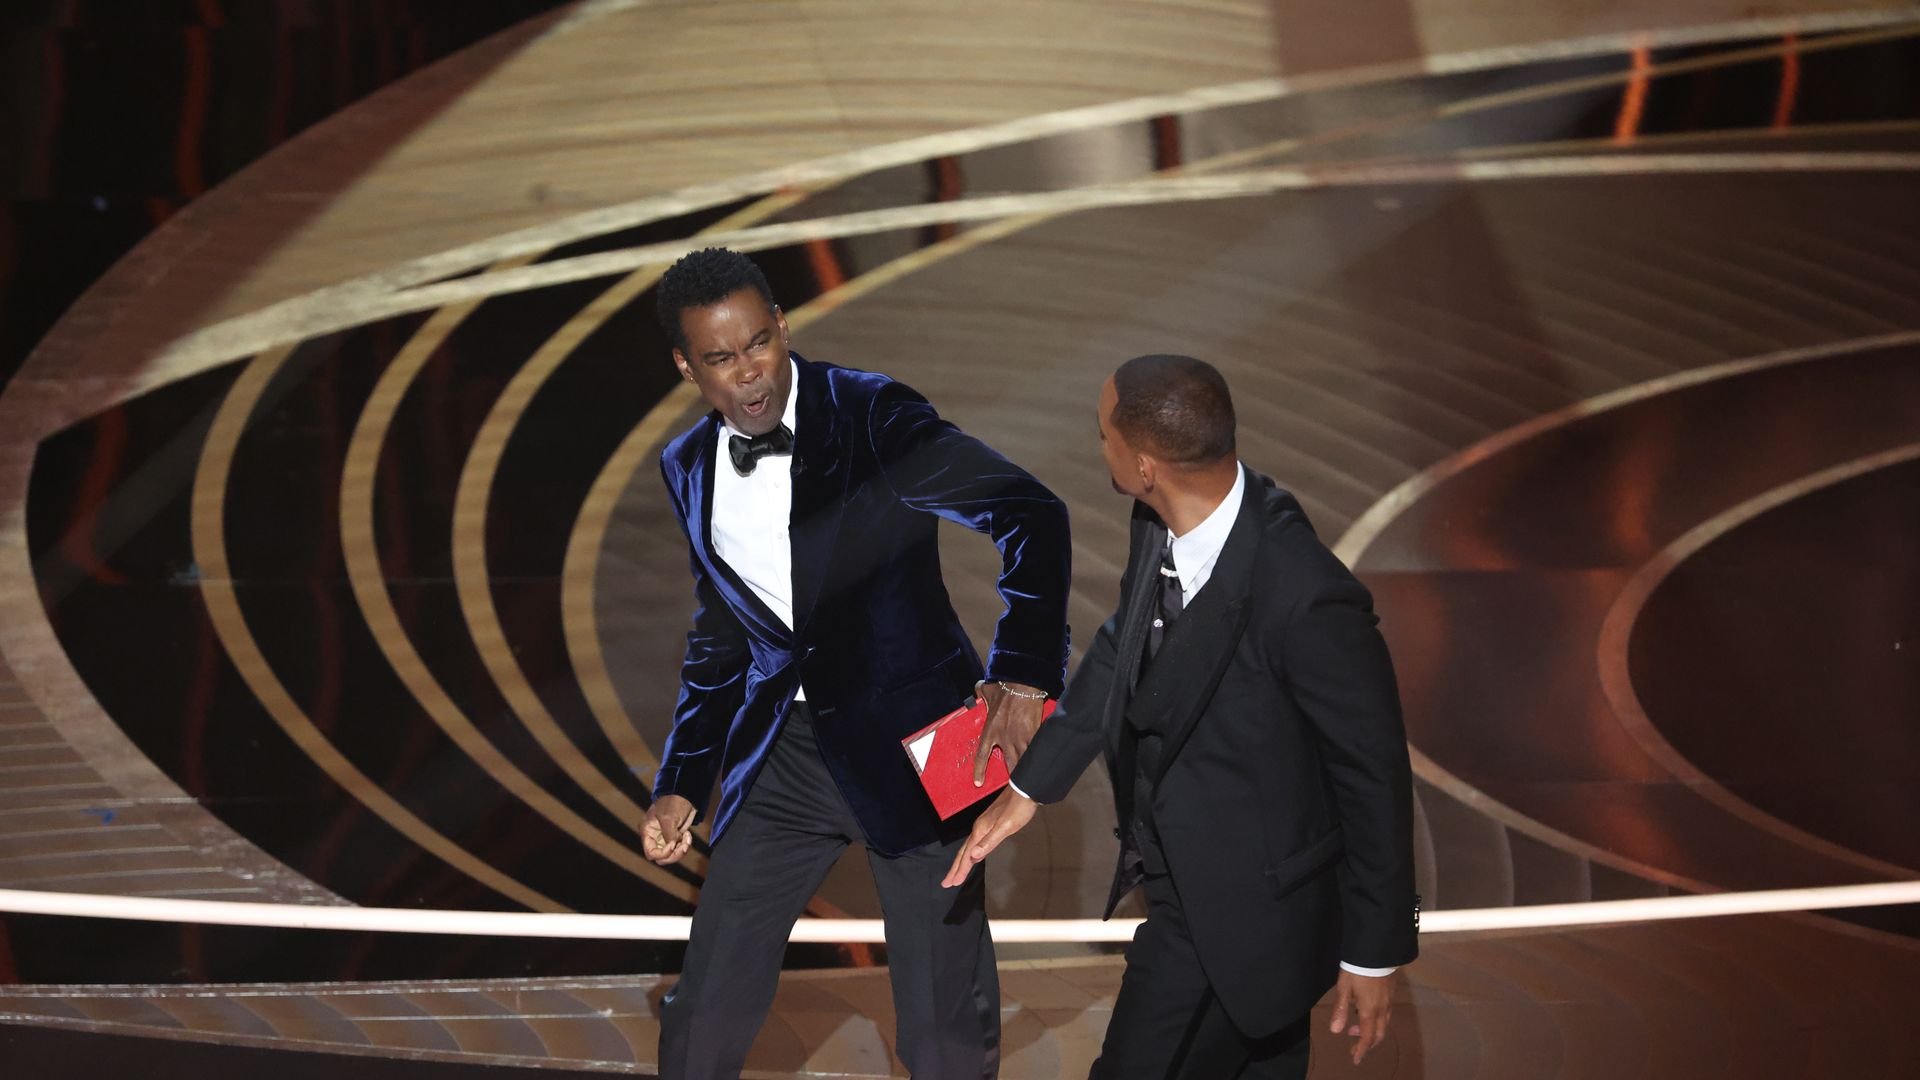 Will Smith banned from Oscars for 10 years for slapping Chris Rock